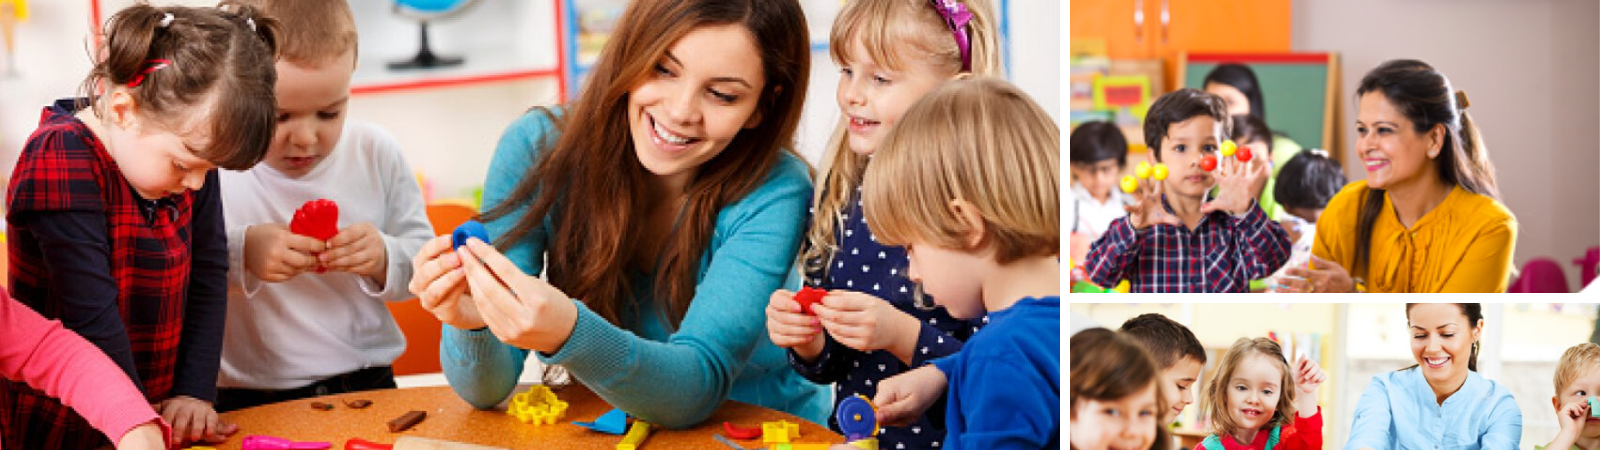 Diploma in Early Childhood Teacher Education Course - Ryan Global Schools